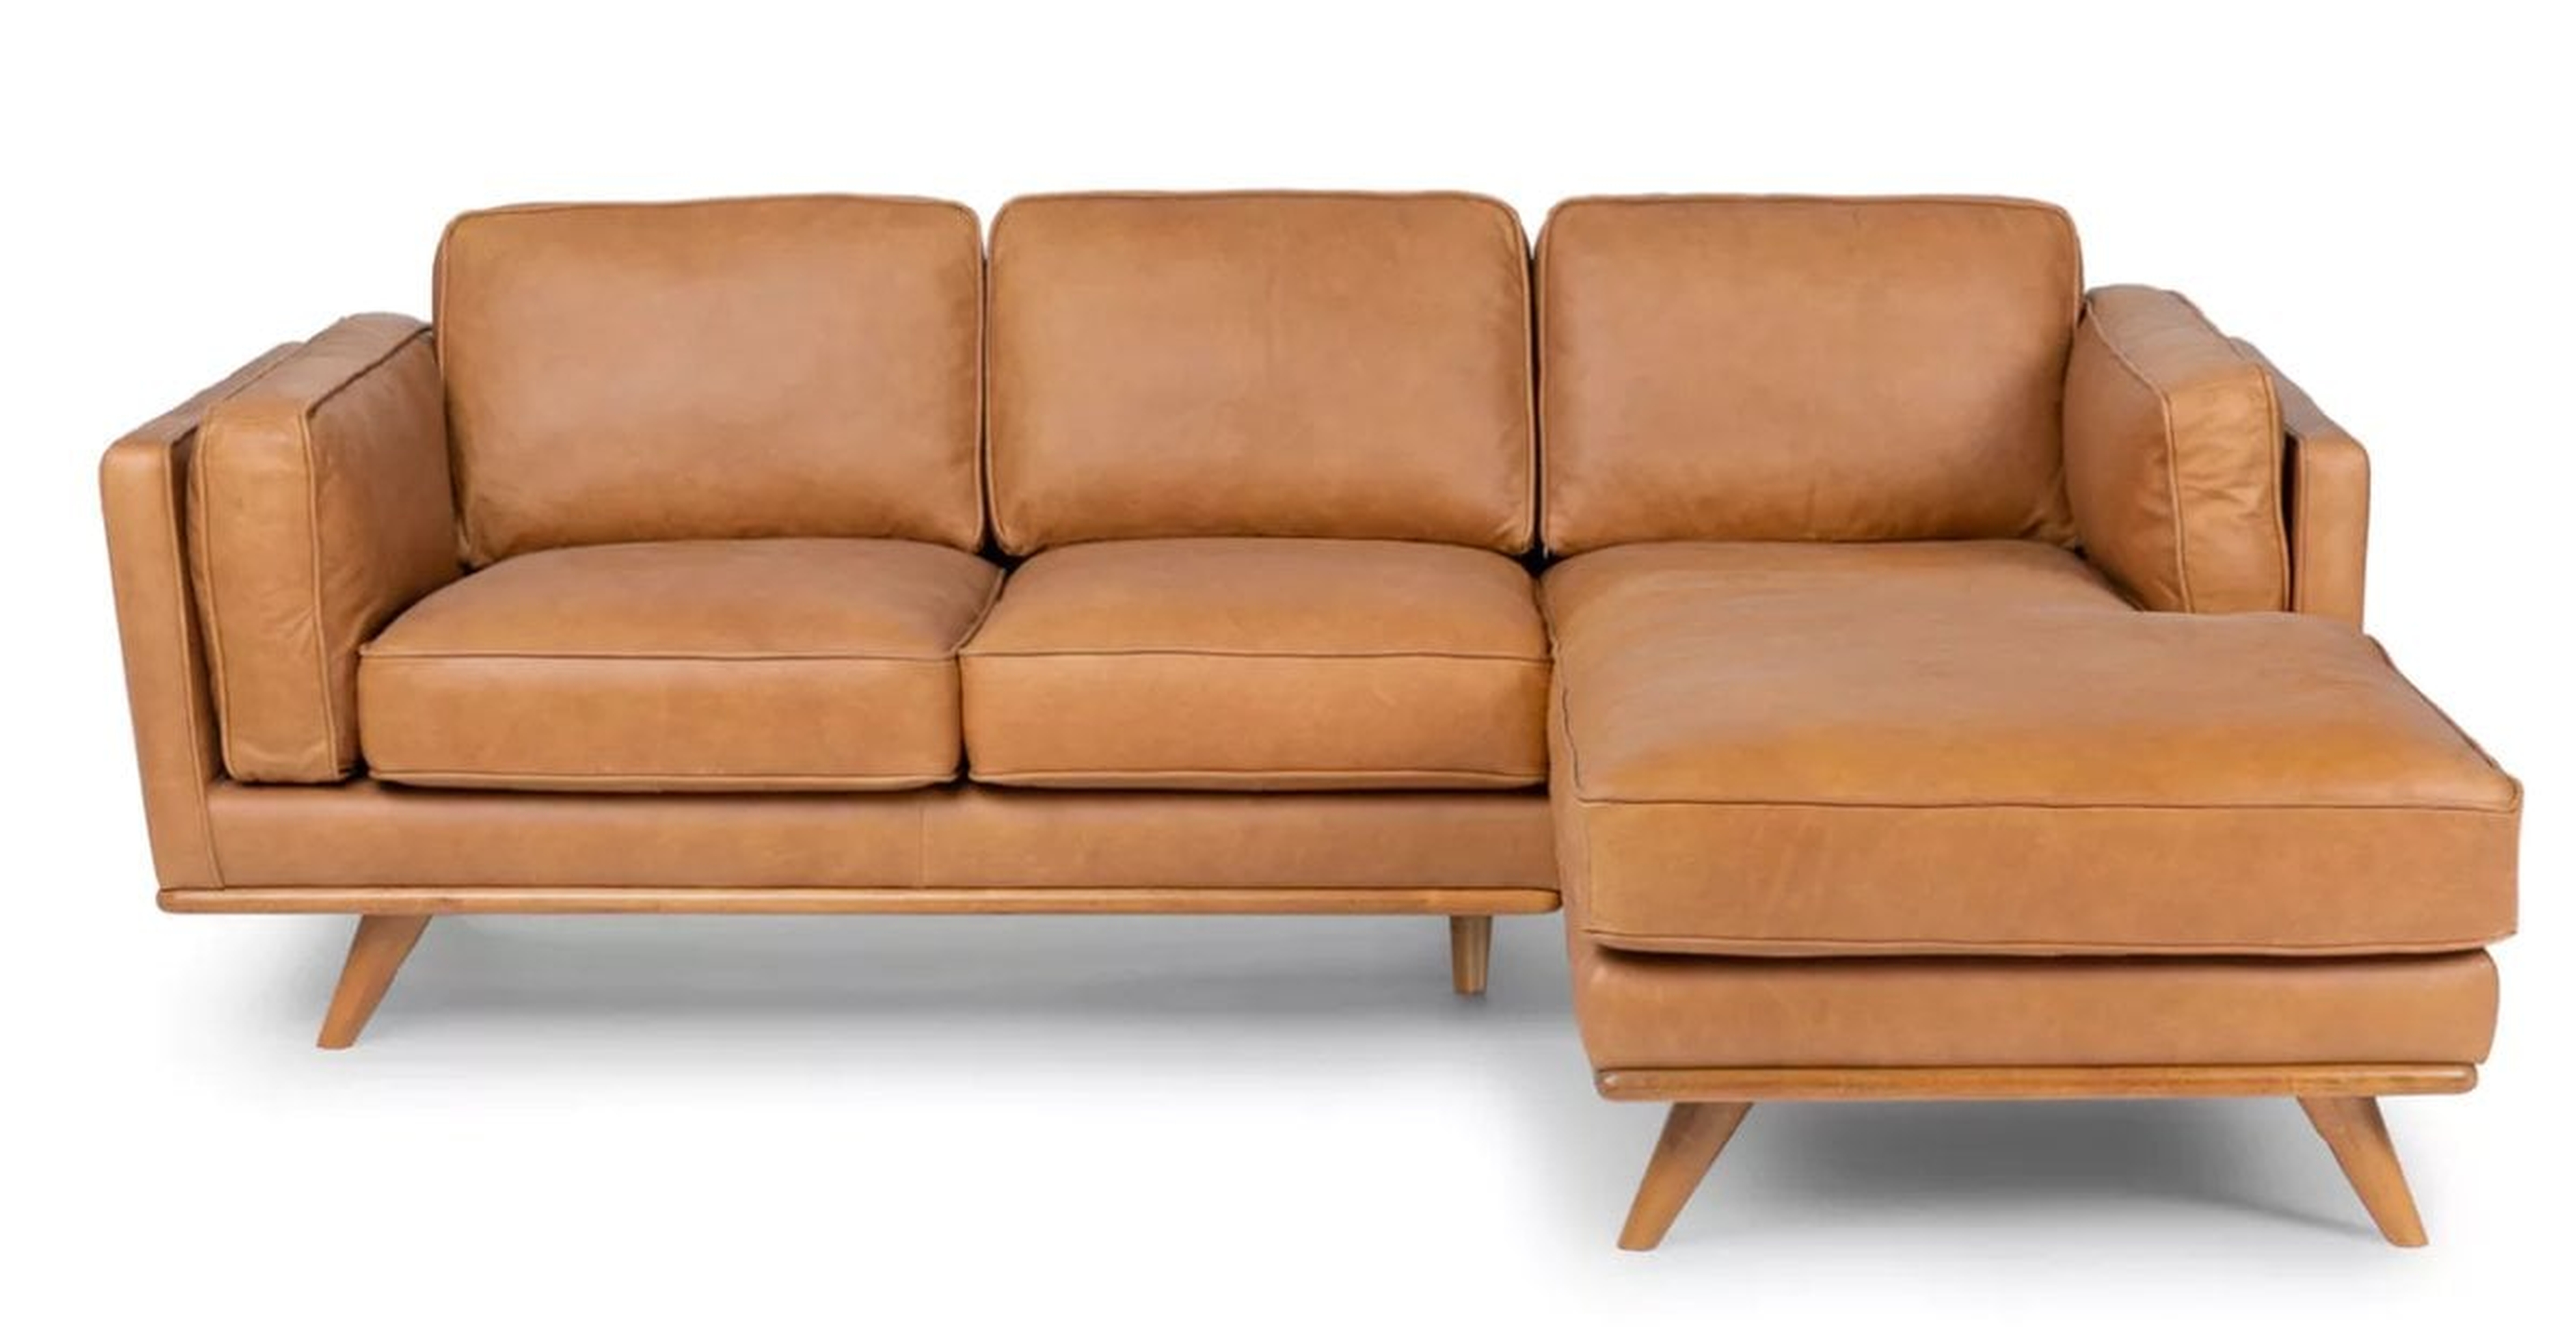 Timber Charme Tan Right Sectional - Article